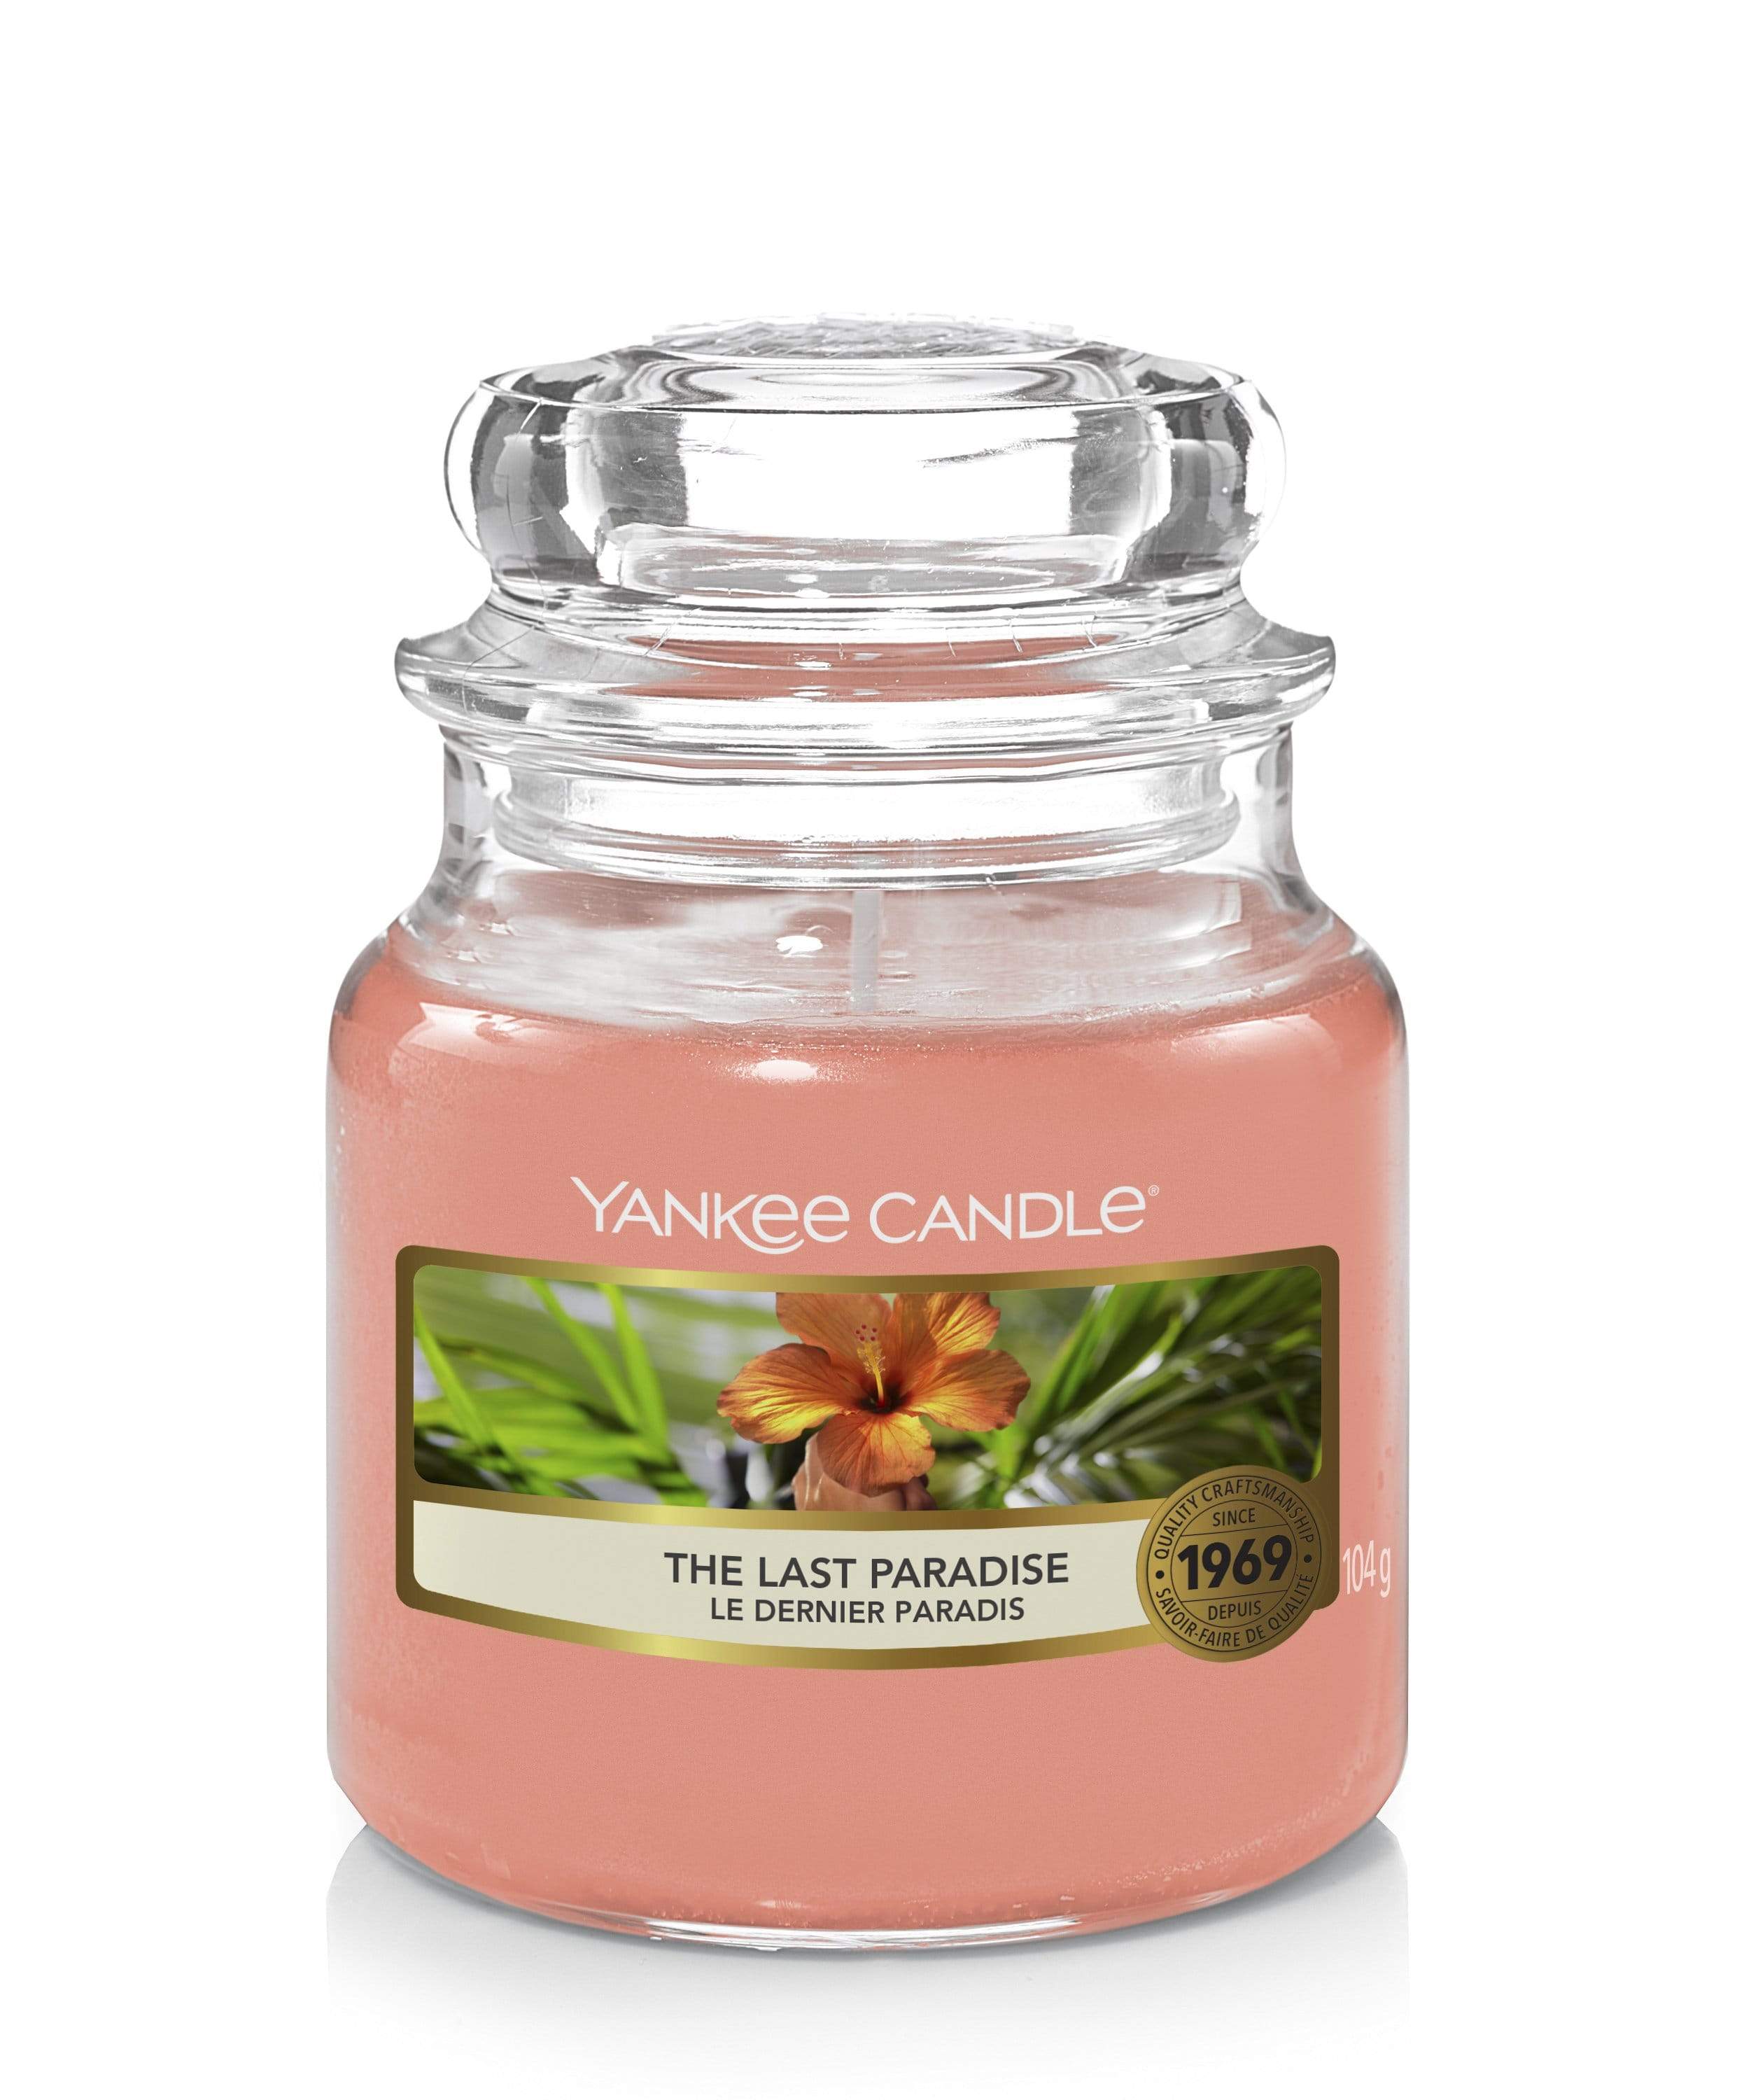 Yankee Candle Small Jar Candle Yankee Candle Small Jar - The Last Paradise